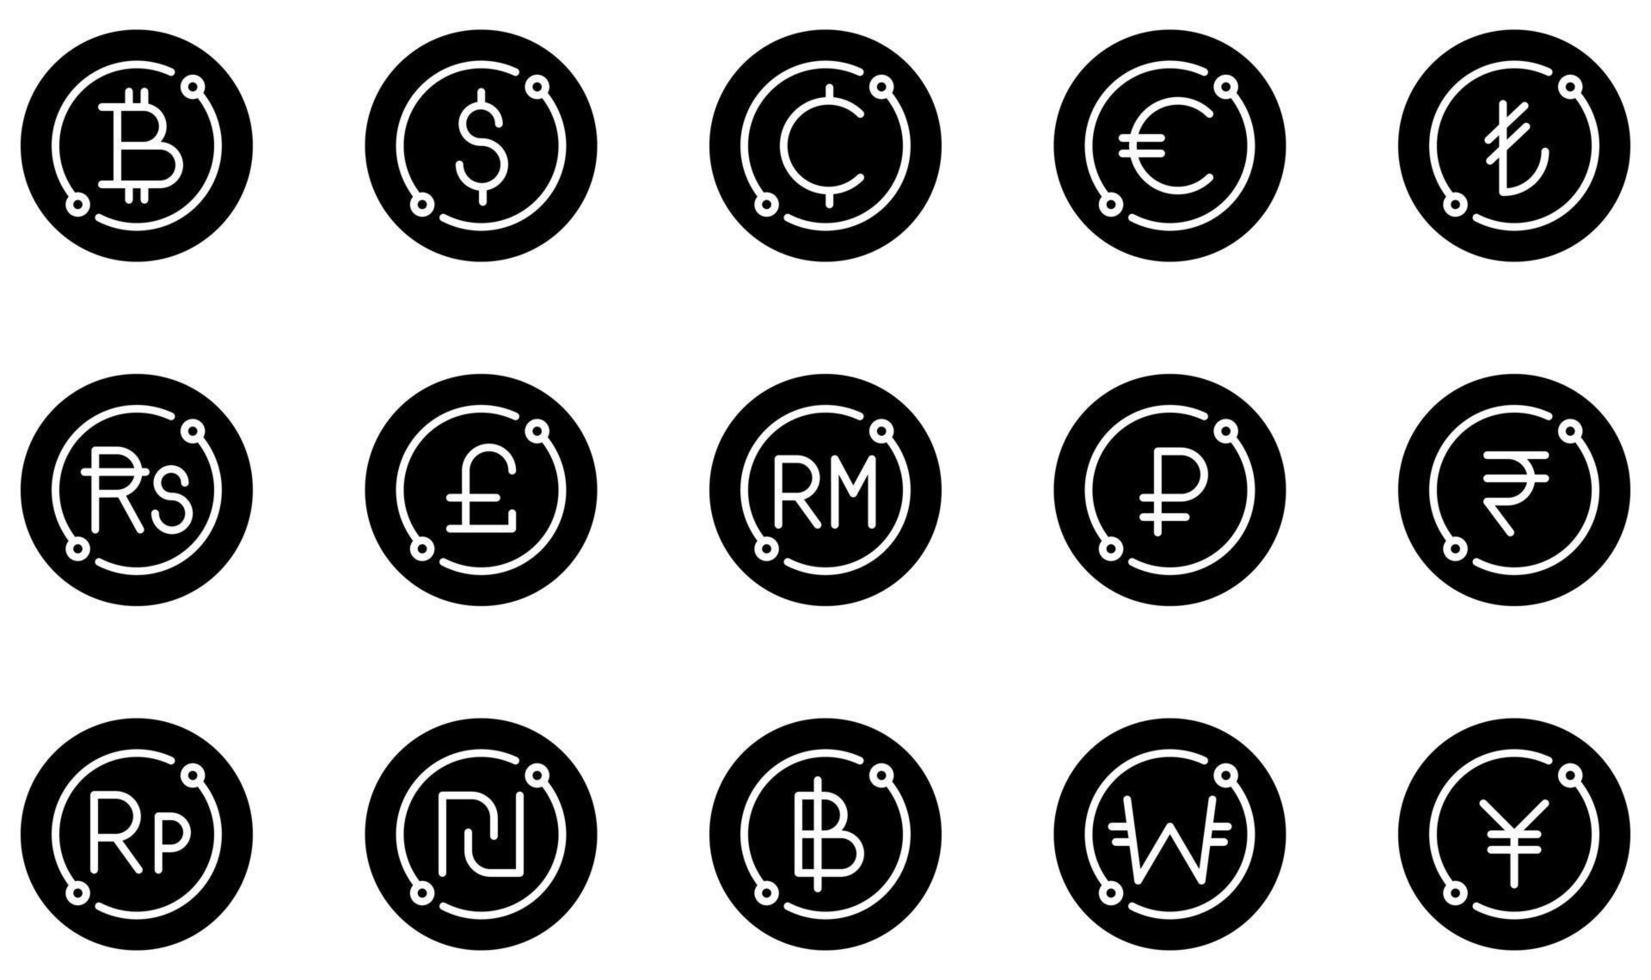 Set of Vector Icons Related to Currency. Contains such Icons as Bitcoin, Dollar, Cents, Euro, Pound, Baht and more.